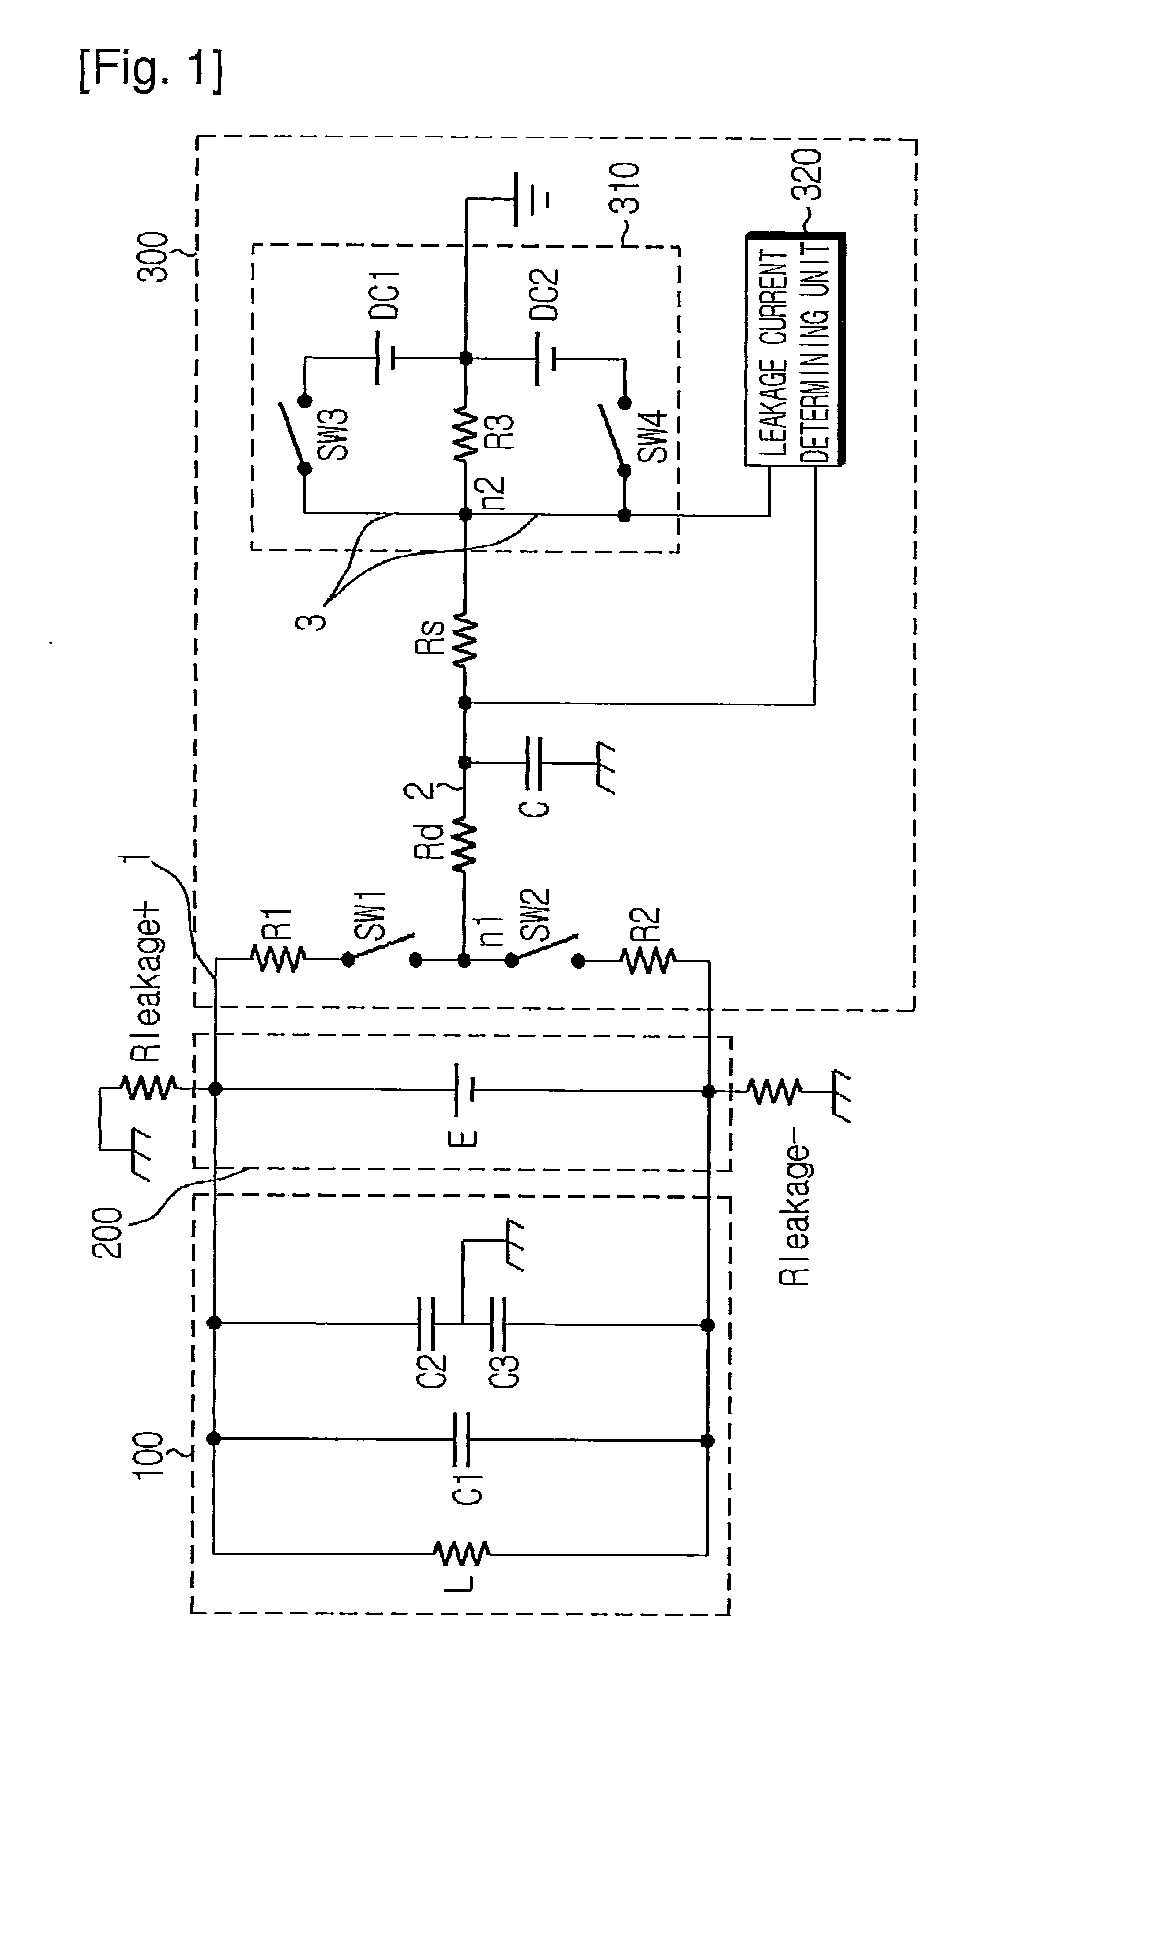 Apparatus and method for sensing leakage current of battery